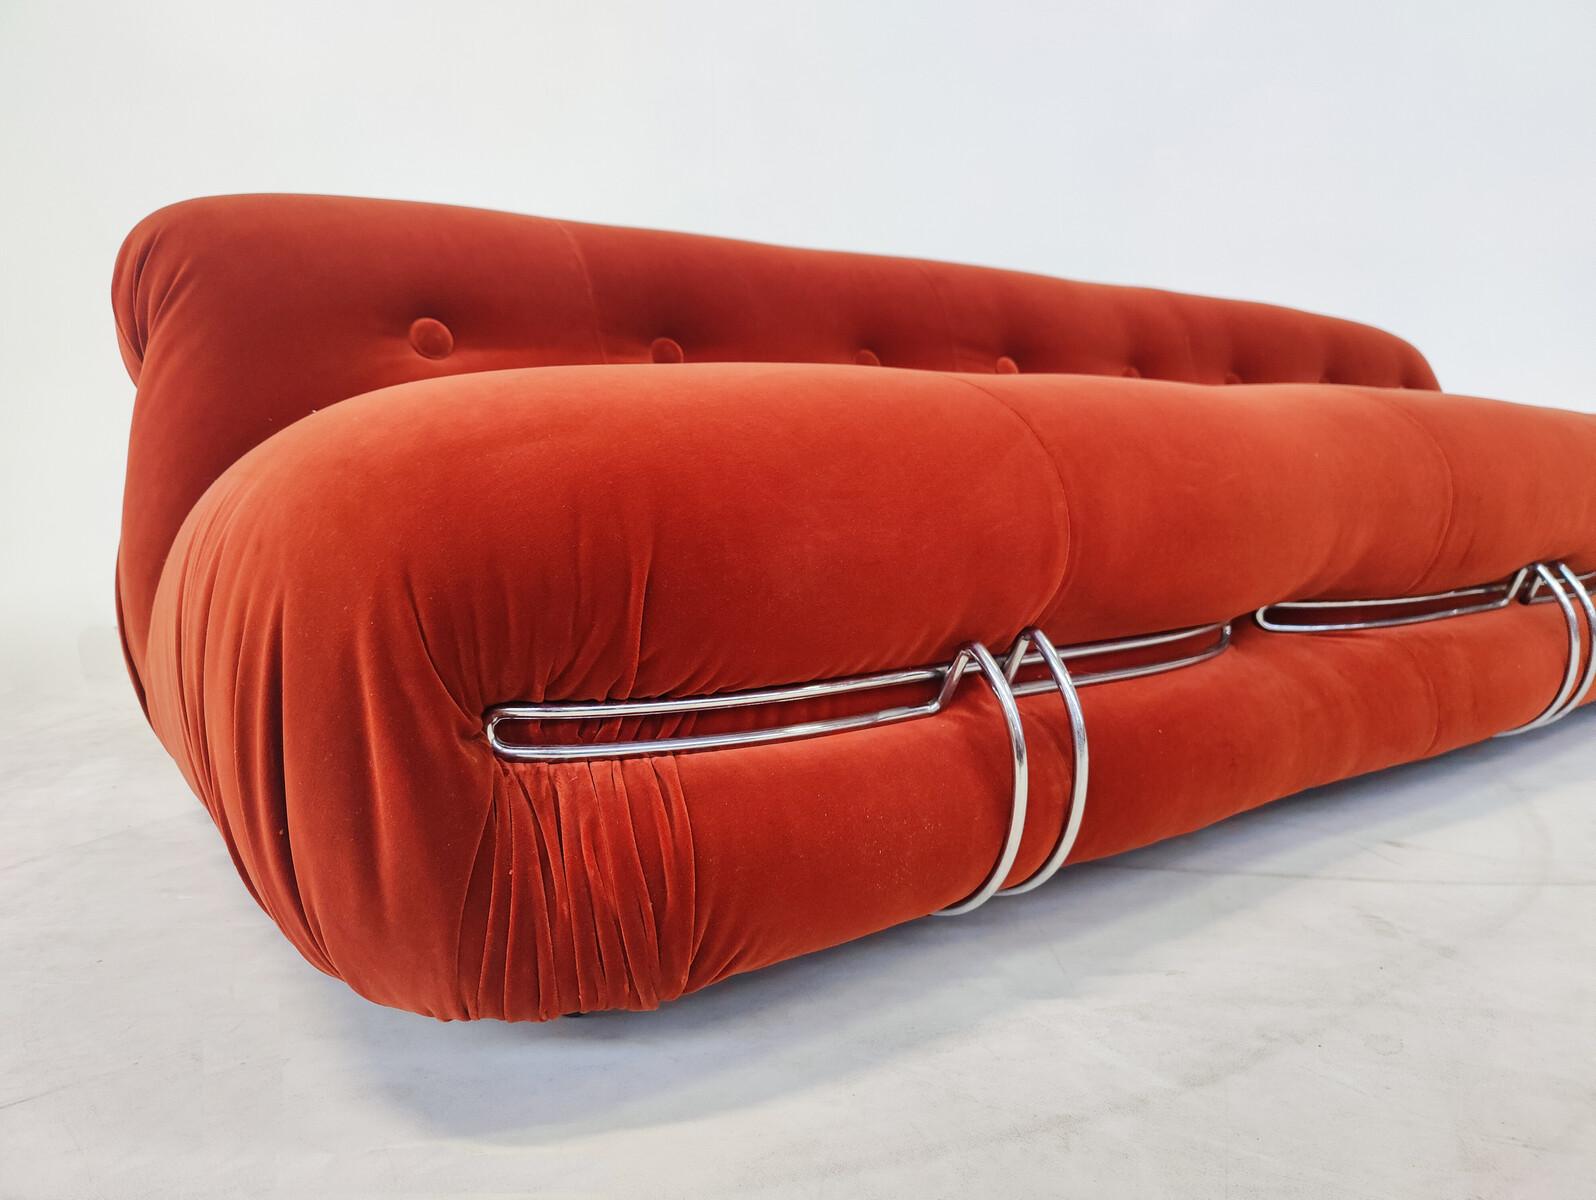 Late 20th Century Midcentury Orange Soriana Three-Seater by Tobia & Afra Scarpa for Cassina For Sale